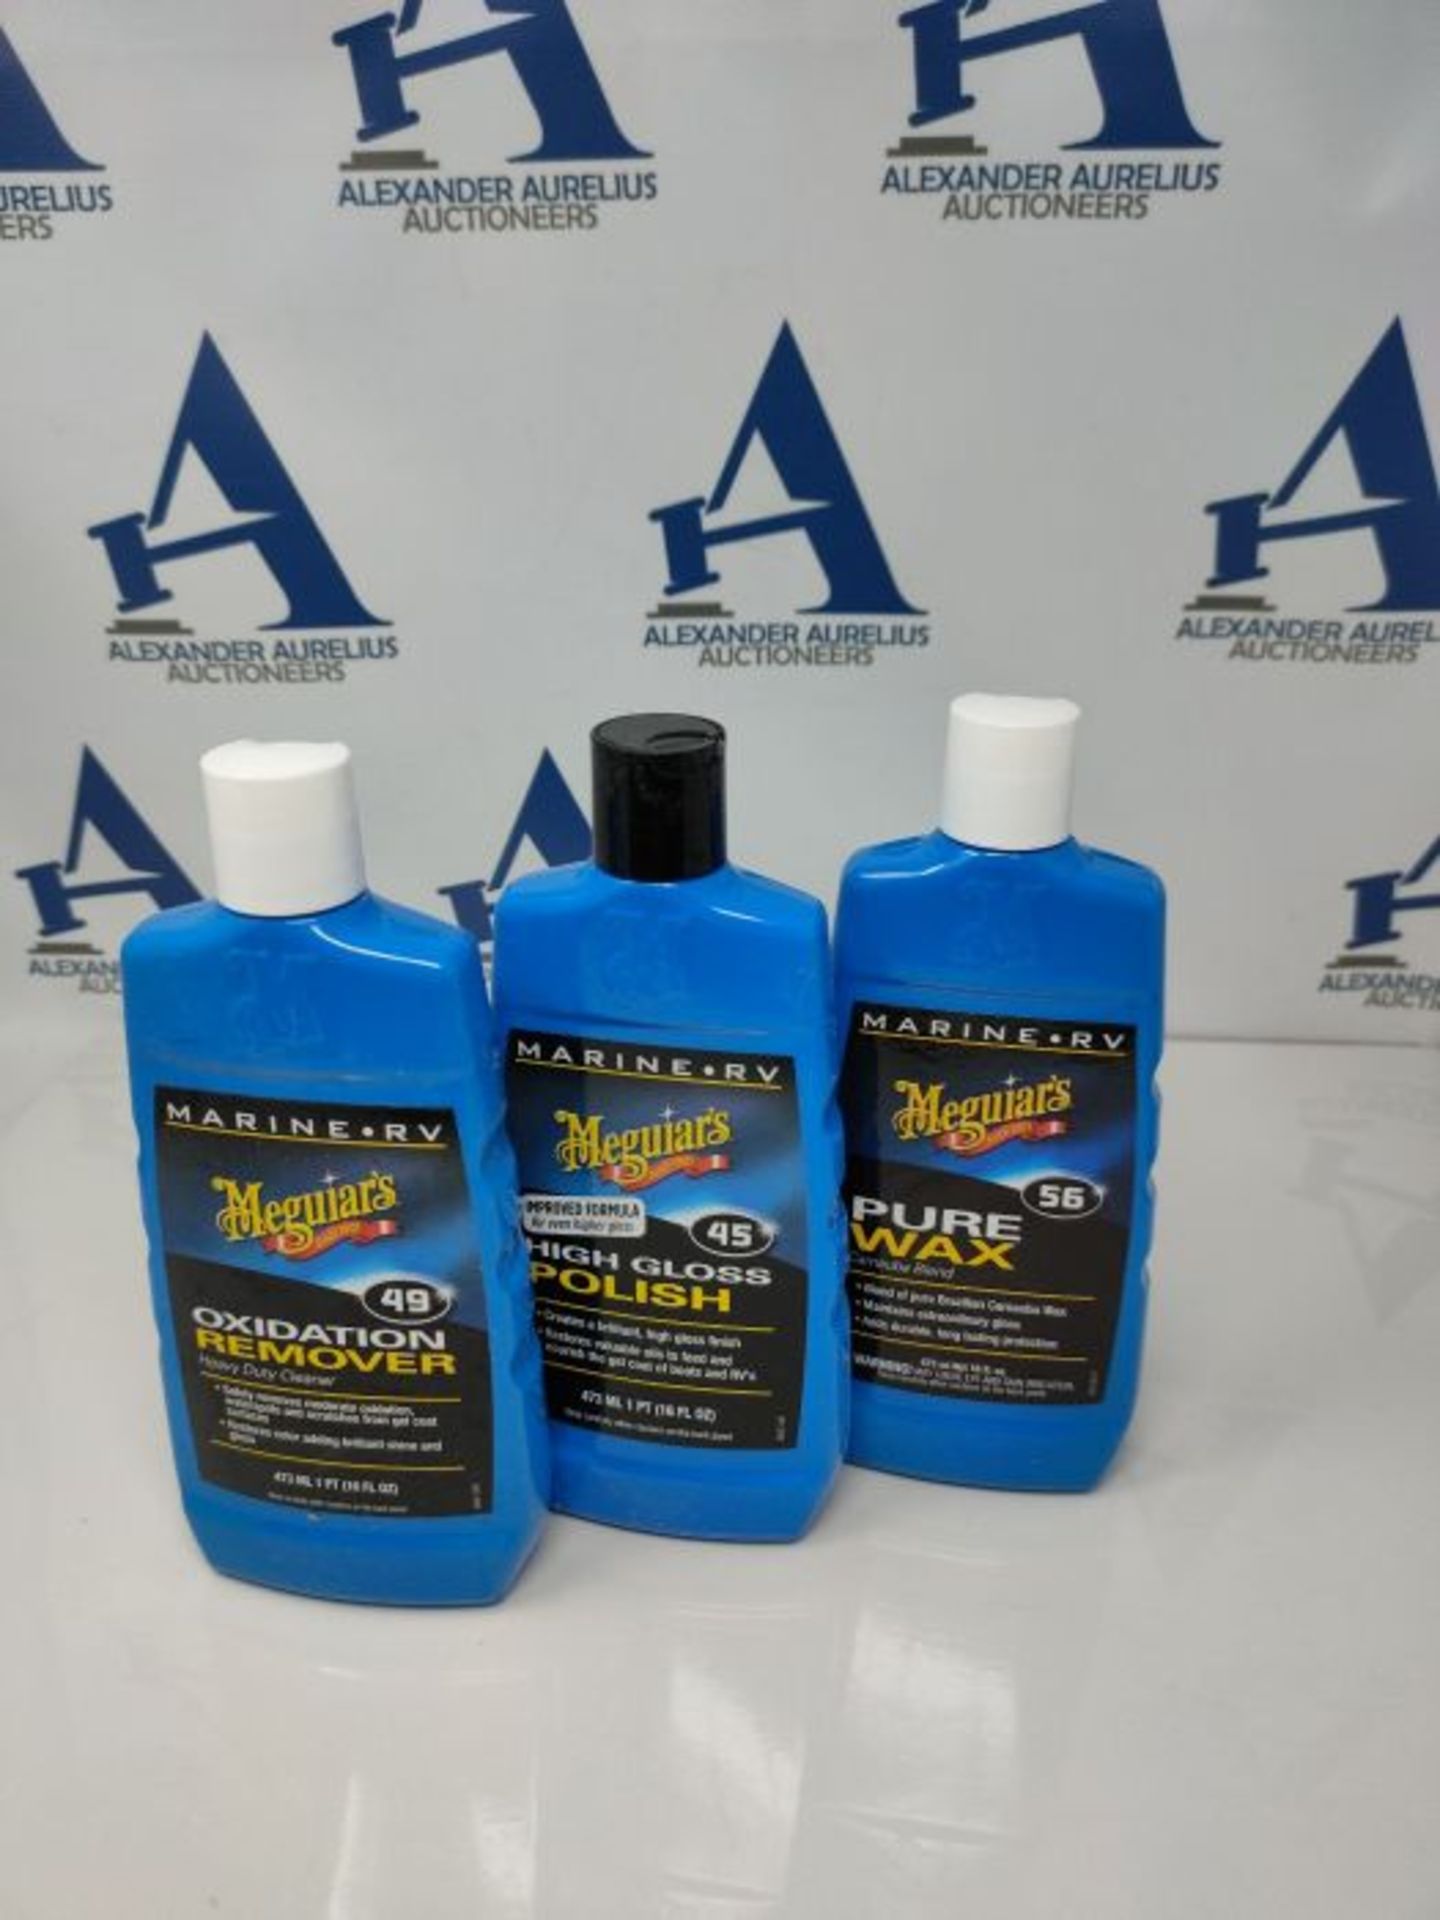 RRP £60.00 Meguiar's Marine RV 49 Boat Restoration System M4965 Kit contains Oxidation Remover, H - Image 3 of 3